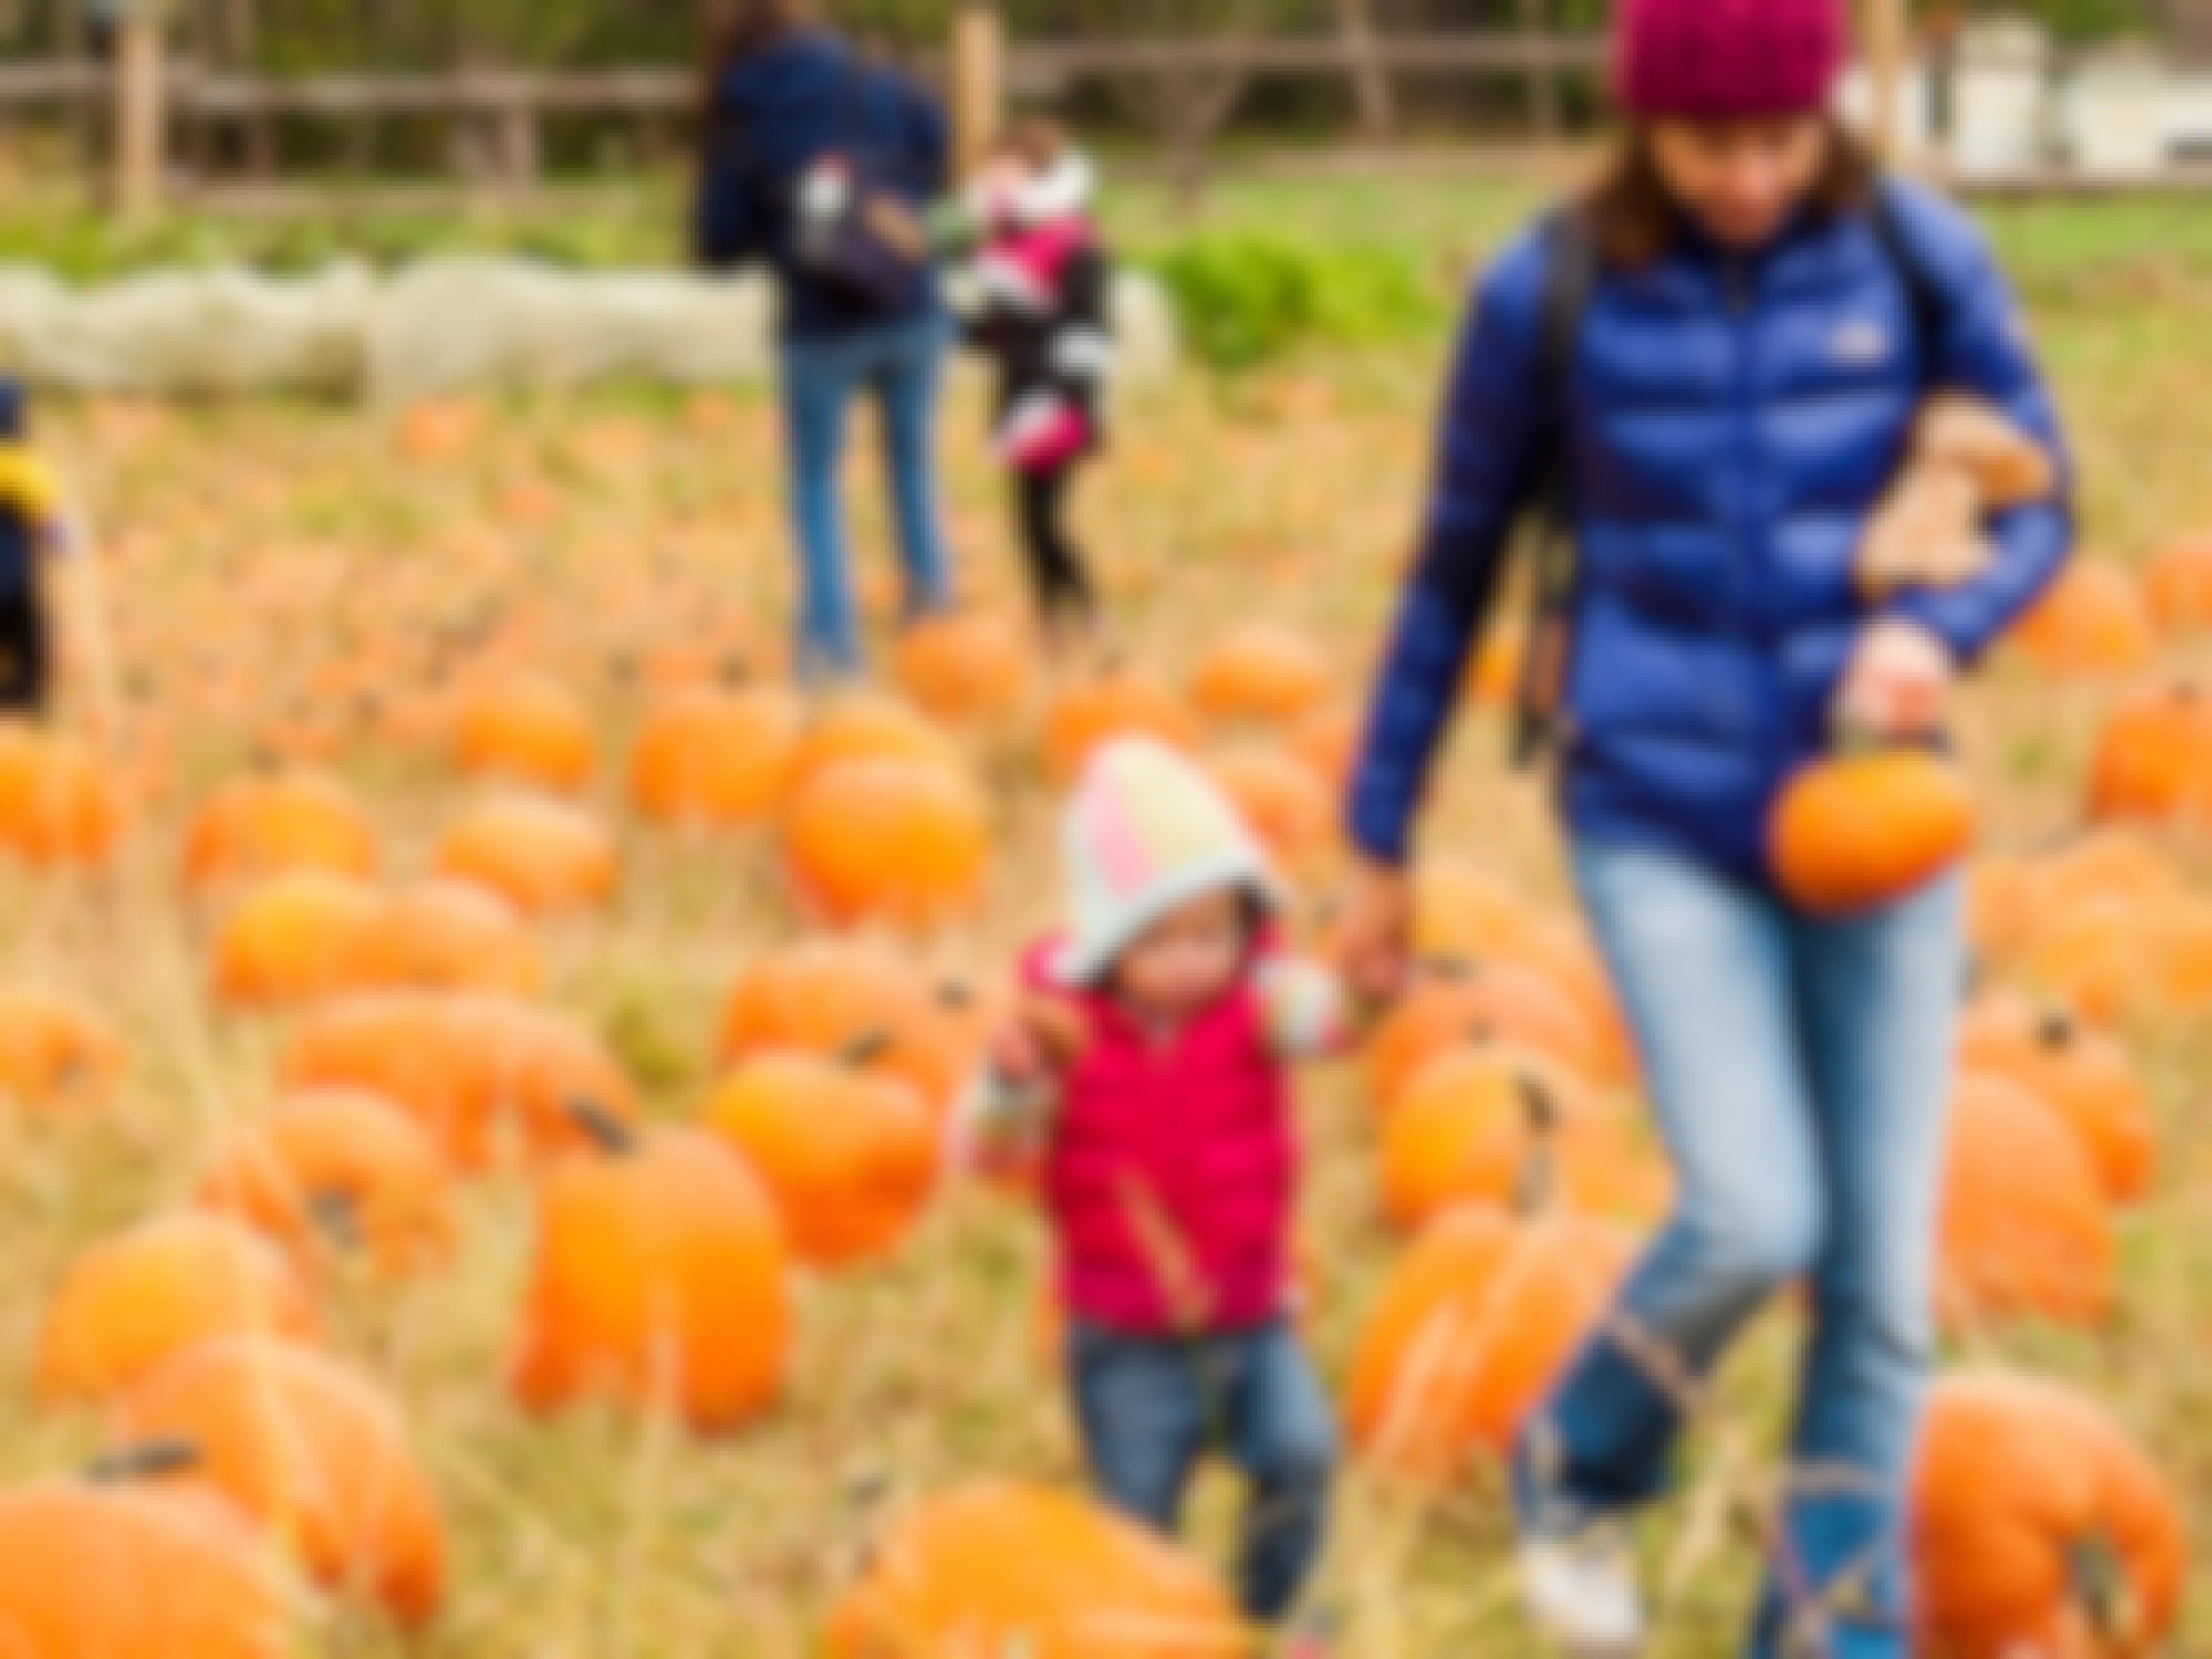 A woman and child walking hand-in-hand through a pumpkin patch